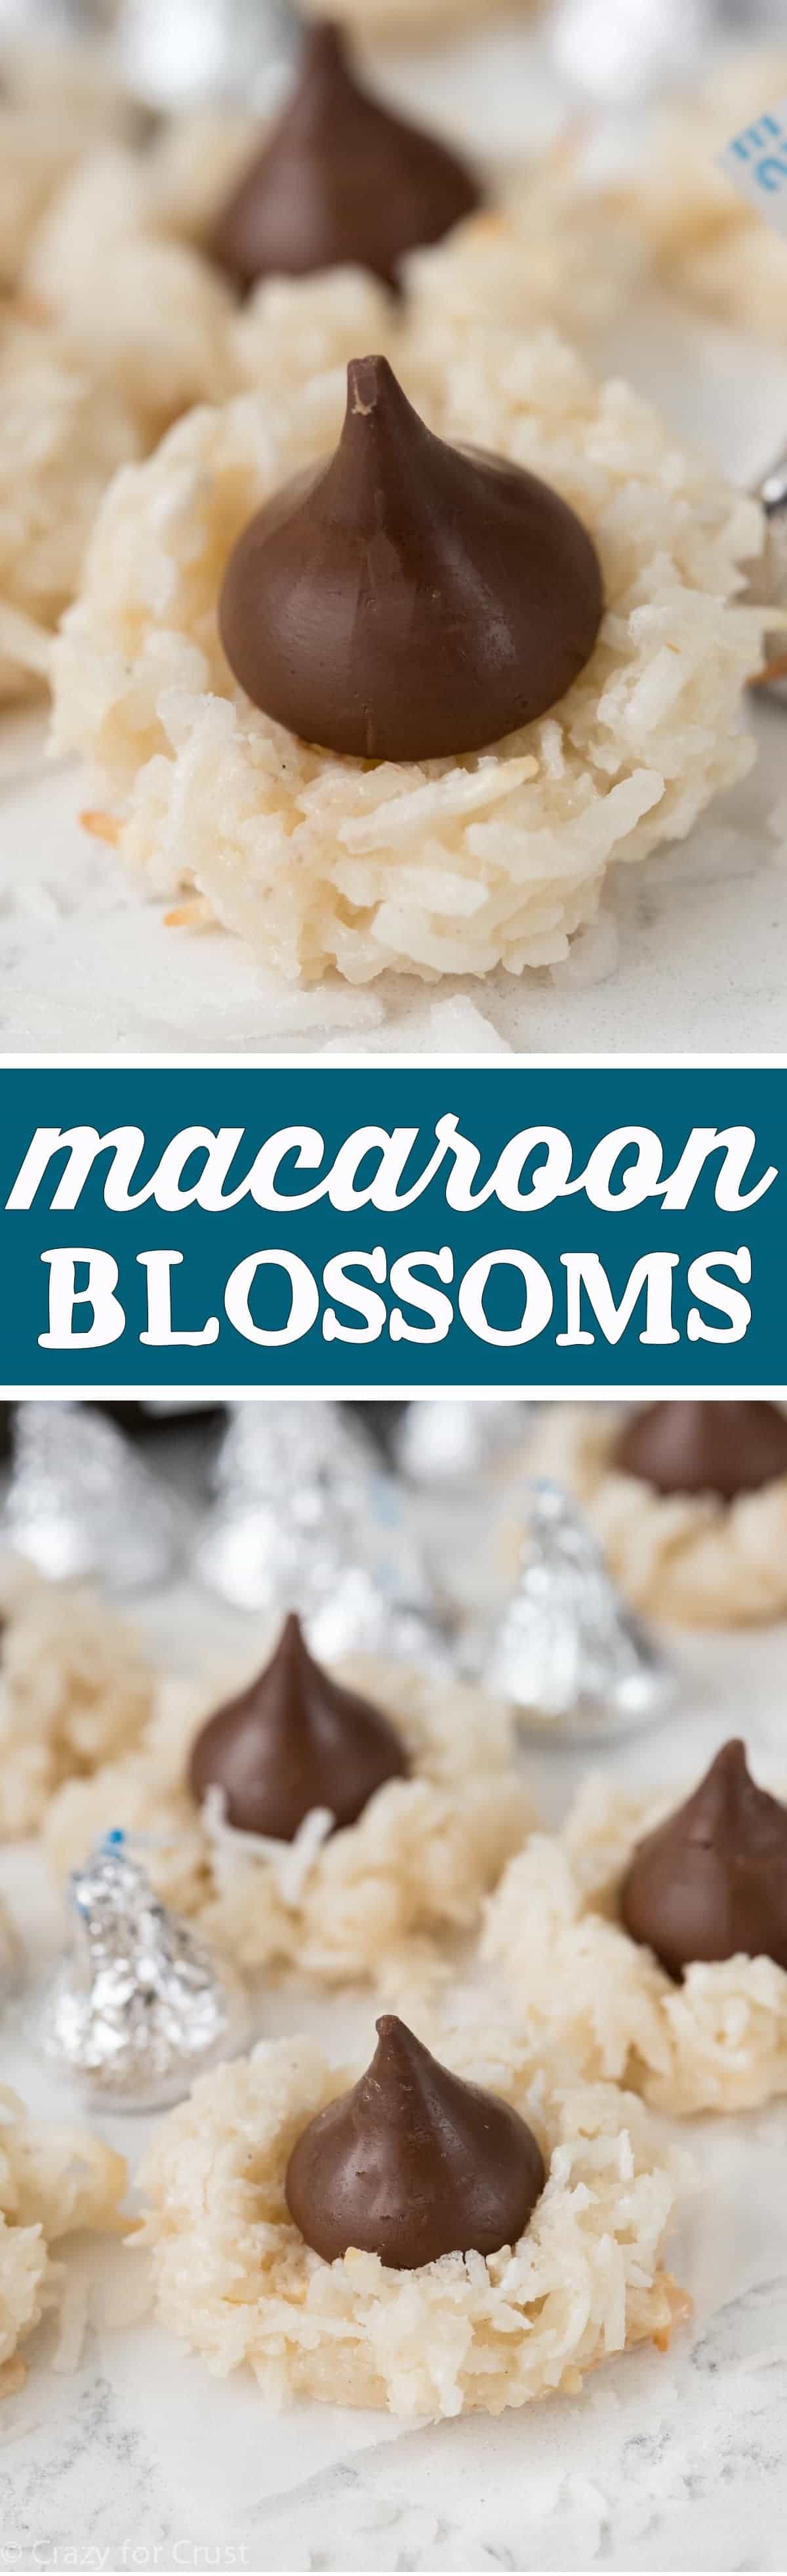 Easy Macaroon Blossoms Recipe - this cookie is great all year round! A coconut macaroon topped with a Hershey's Kiss, and they are egg free and can be made gluten free!